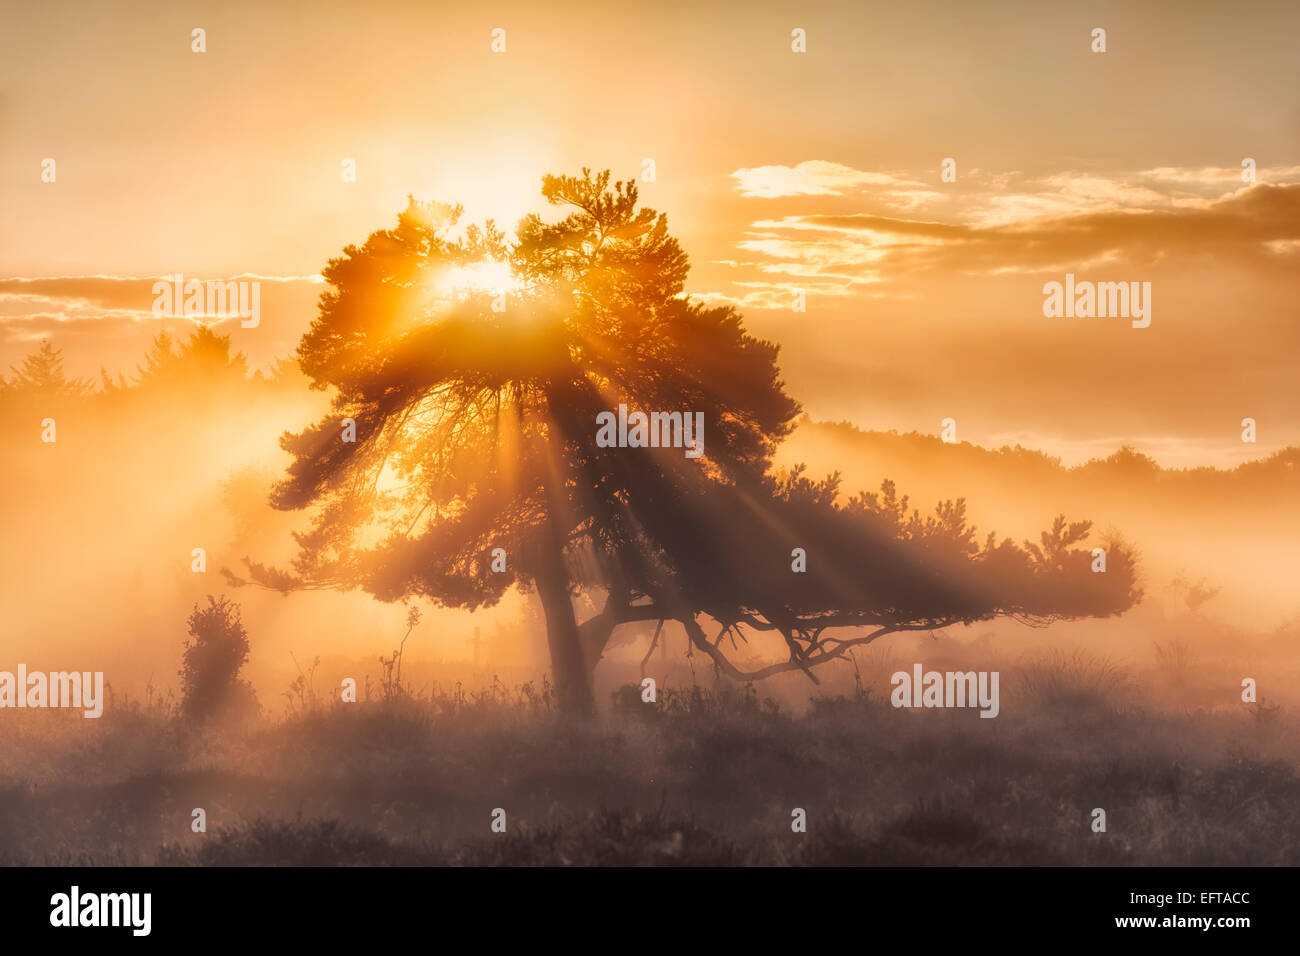 The power of nature. Morning sun shines through a tree with bright golden rays of sun light on an autumn morning with fog. Stock Photo